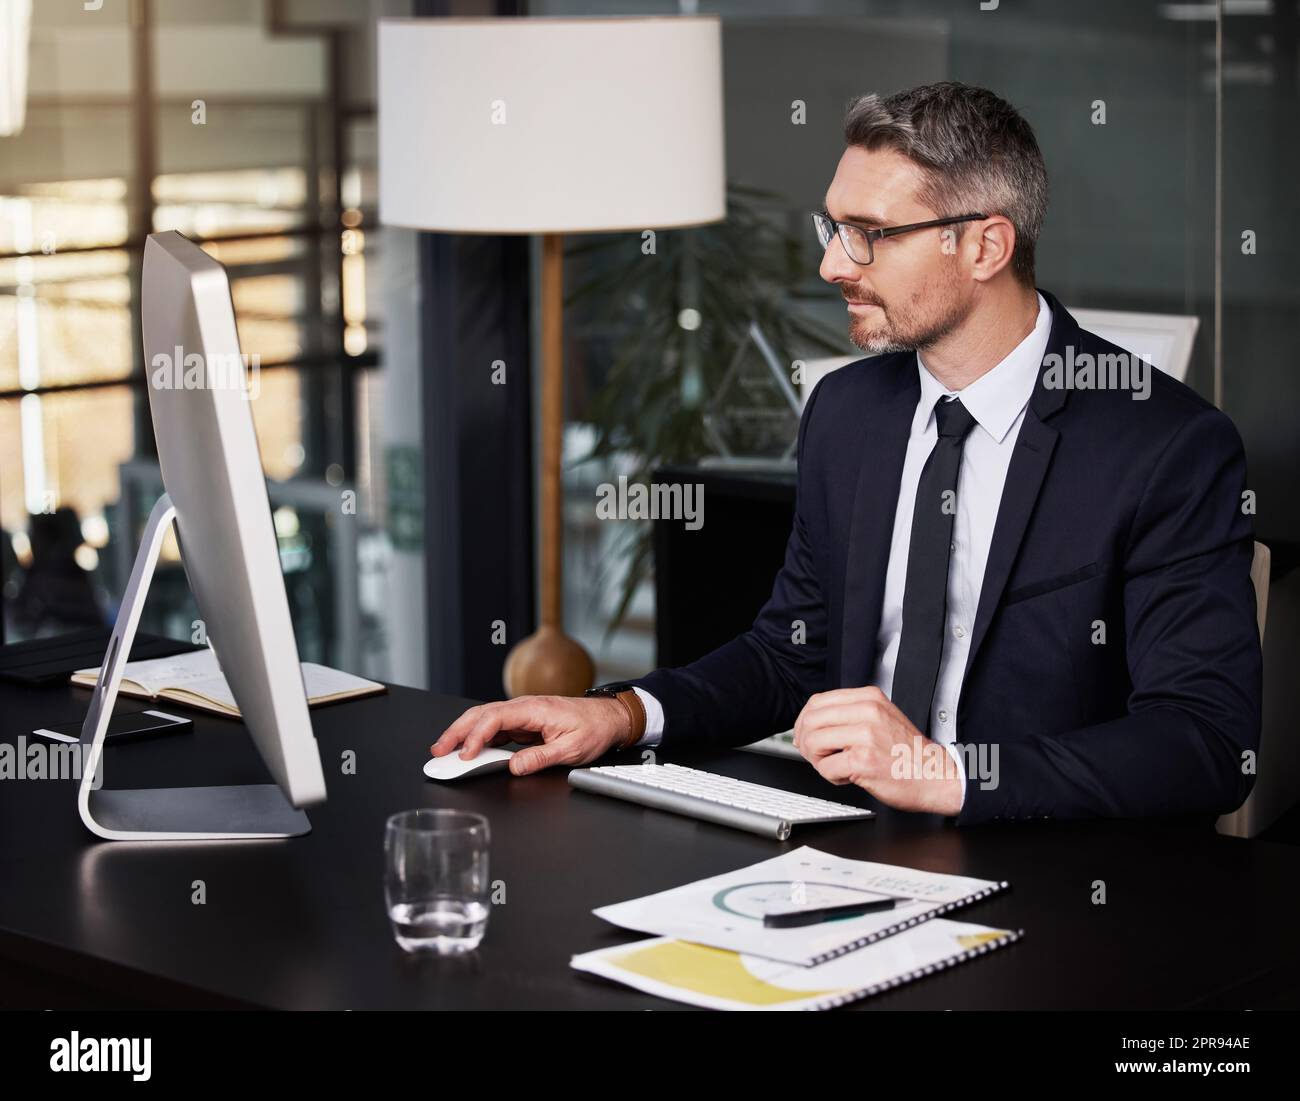 Delivering excellent work is what opens new doors. a businessman using his computer while sitting at his desk. Stock Photo